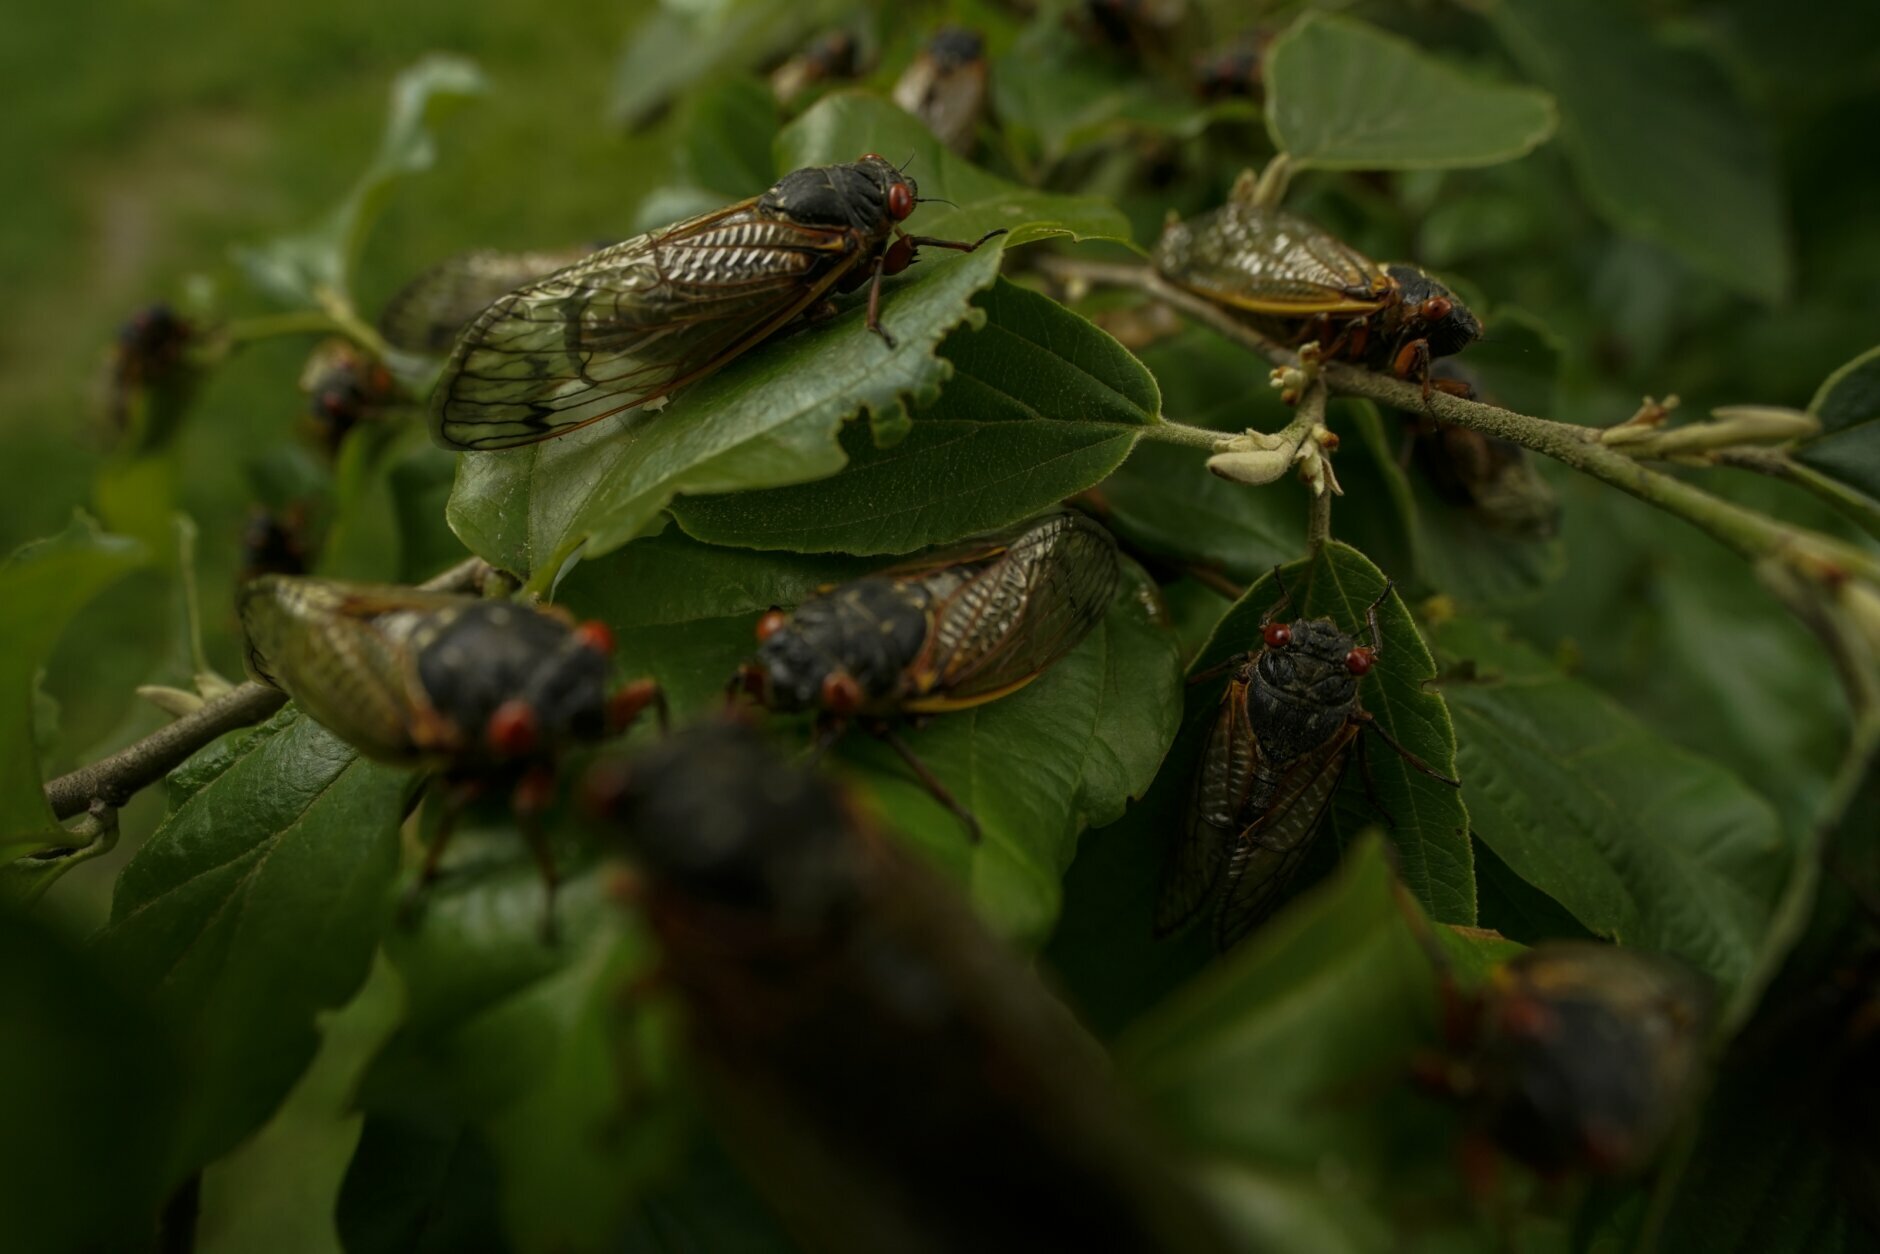 Adult cicadas cover a plant, Monday, May 17, 2021, at Woodend Sanctuary and Mansion, in Chevy Chase, Md. (AP Photo/Carolyn Kaster)